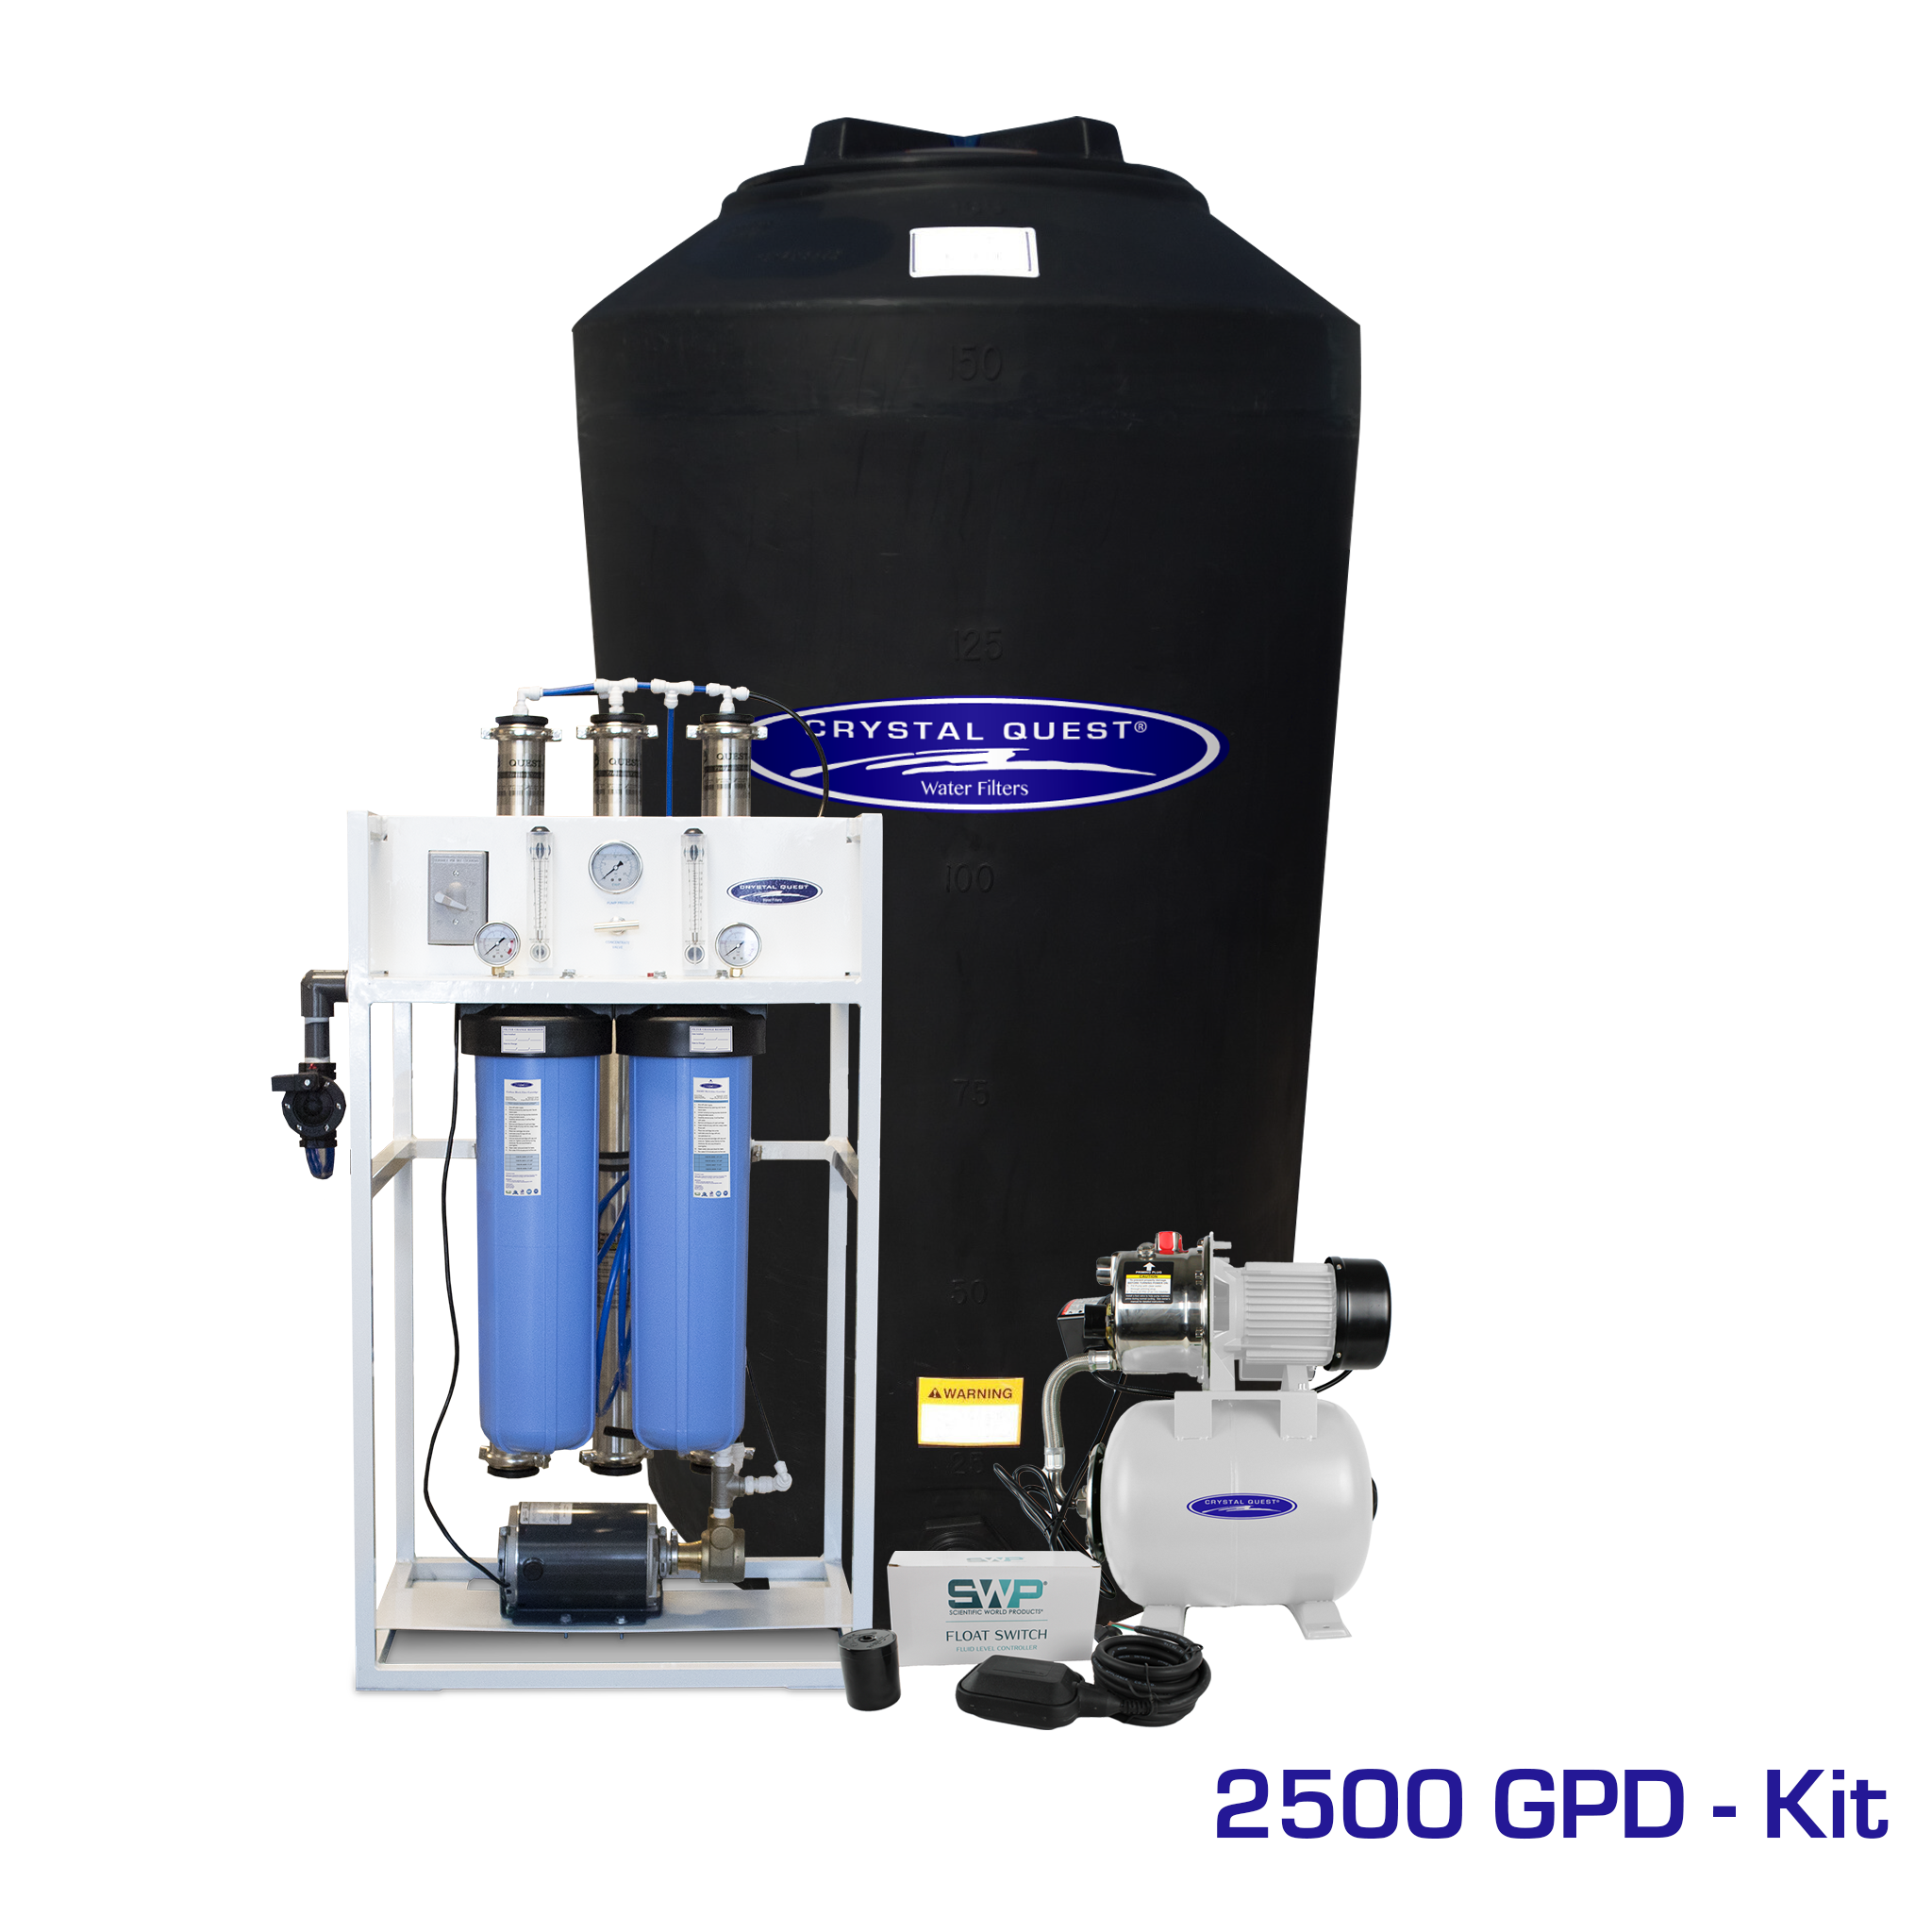 2,500 GPD / Add Storage Tank Kit (165 Gal) Medical Mid-Flow Reverse Osmosis System (500-7000 GPD) - Commercial - Crystal Quest